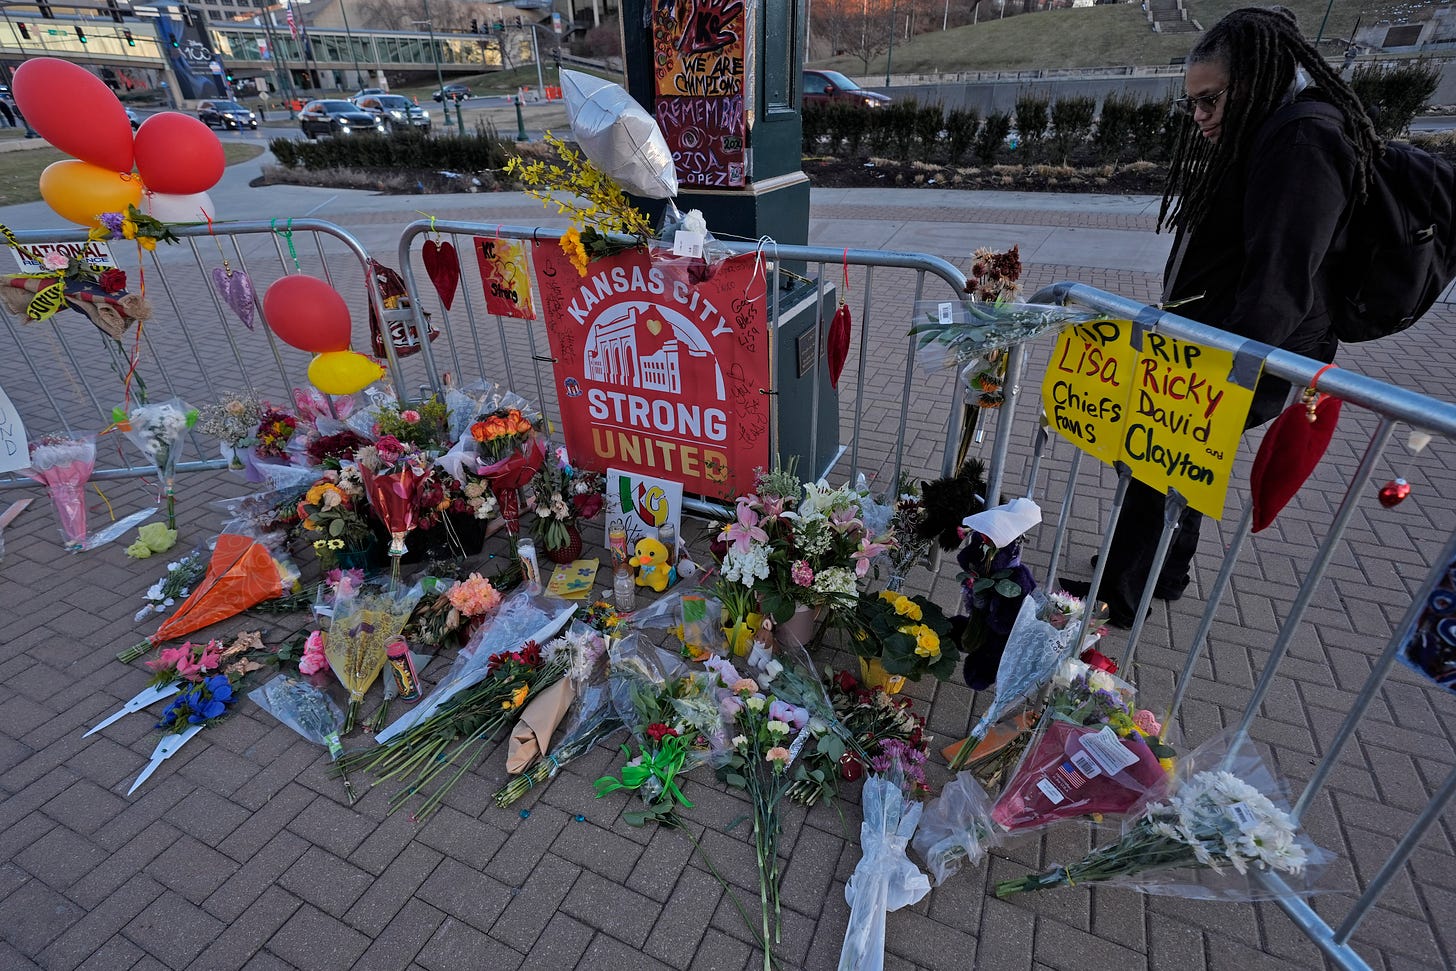 A memorial for victims of the mass shooting in Kansas City with a red ''Kansas City Strong United'' sign and several bouquets of flowers. 